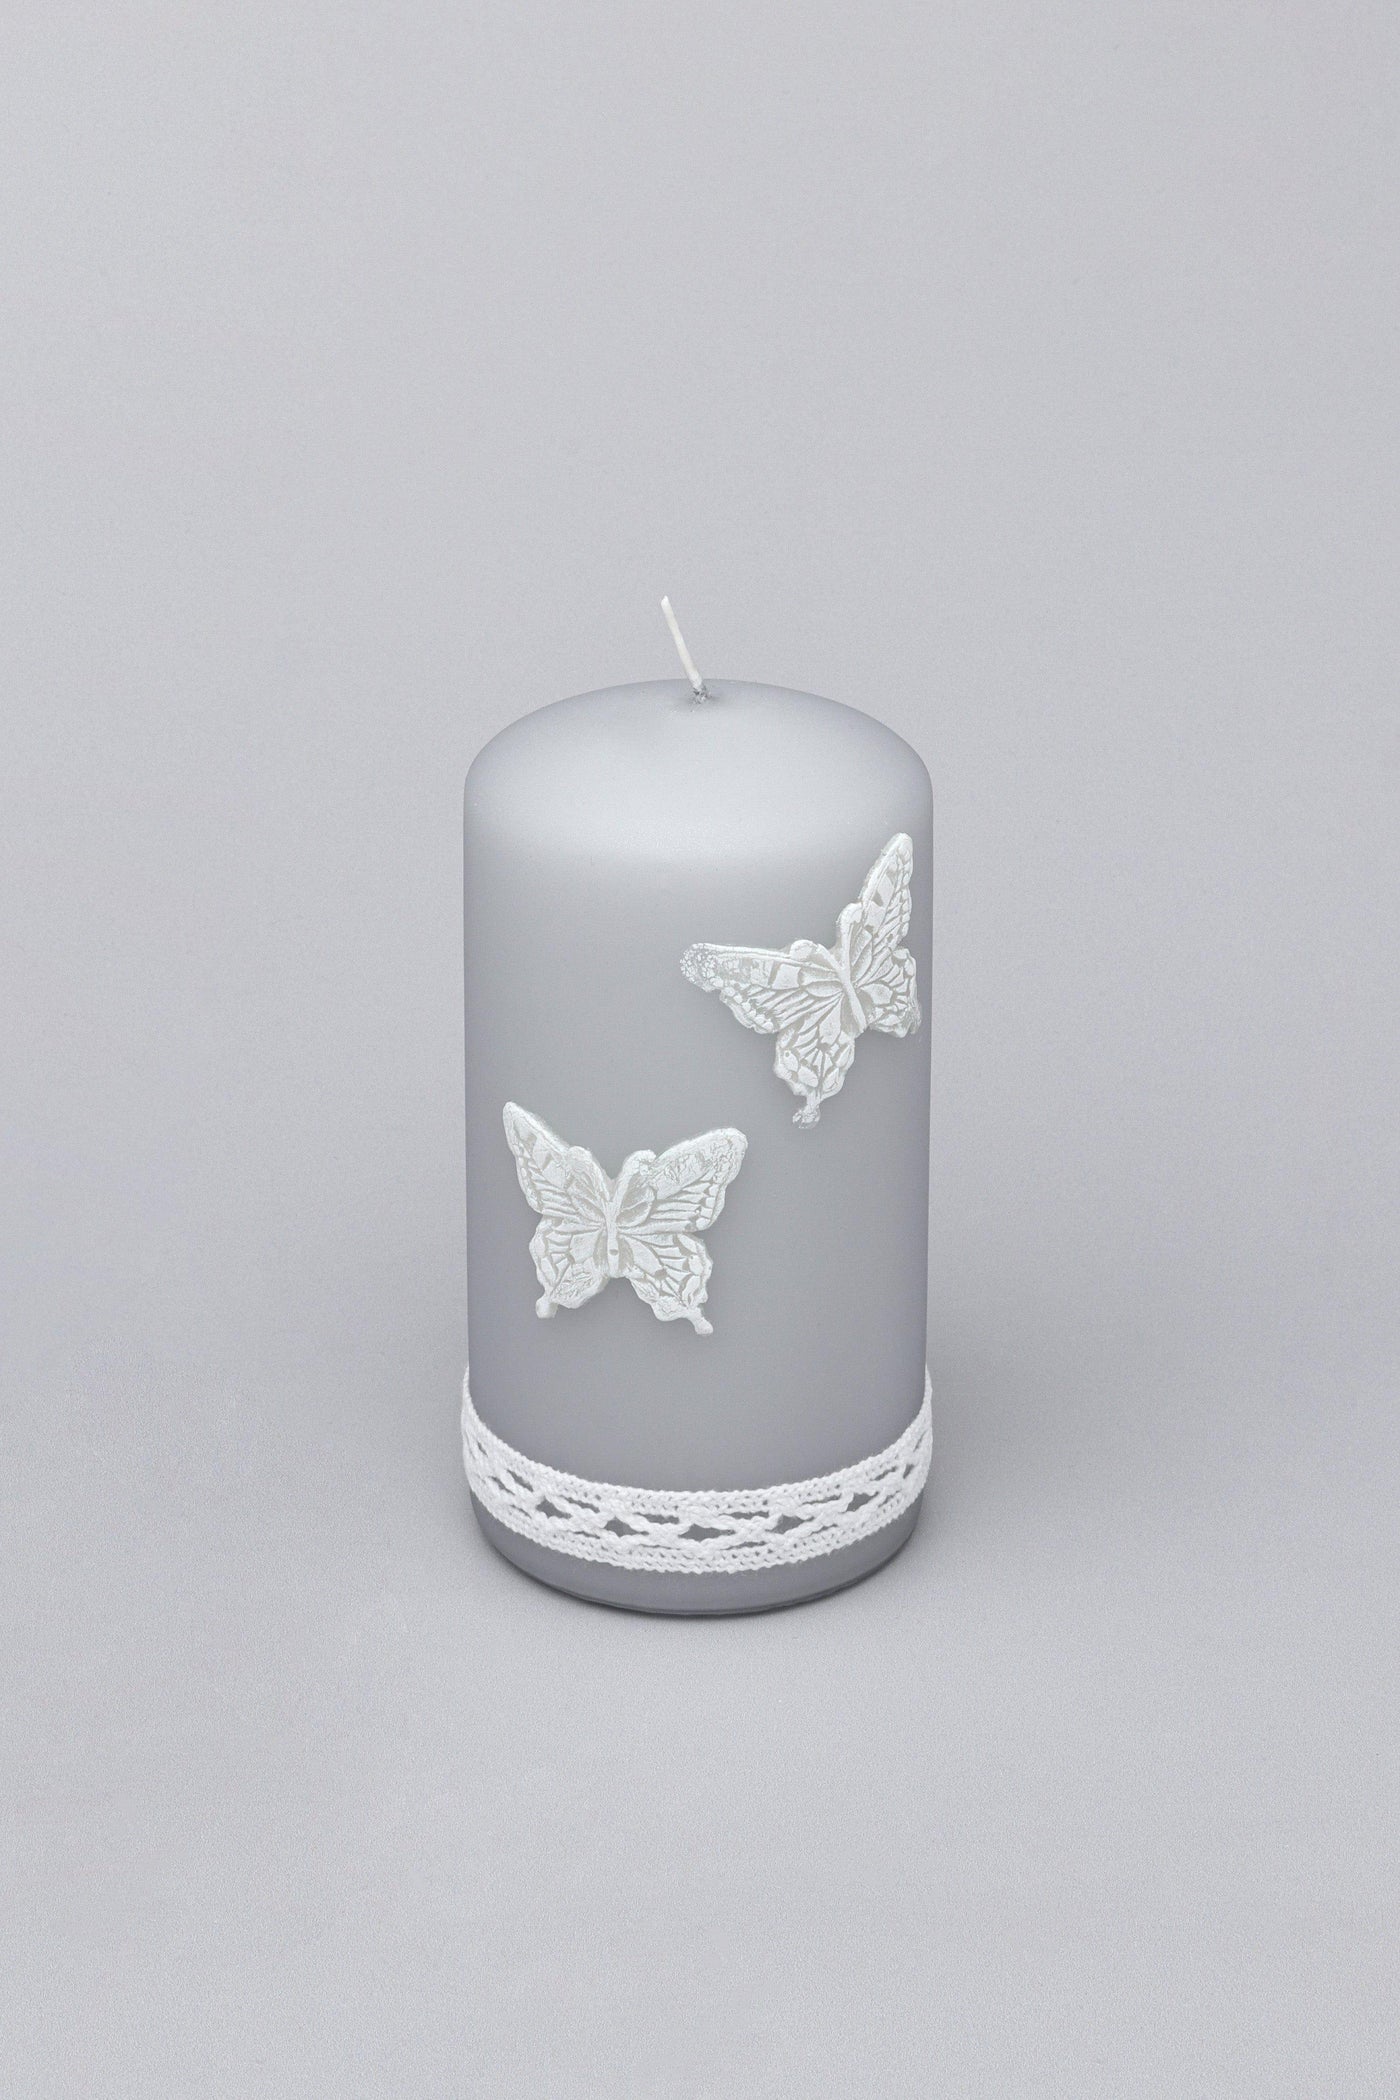 G Decor Candles Grey / Large Emilie Butterfly Grey Lace Pillar Candle